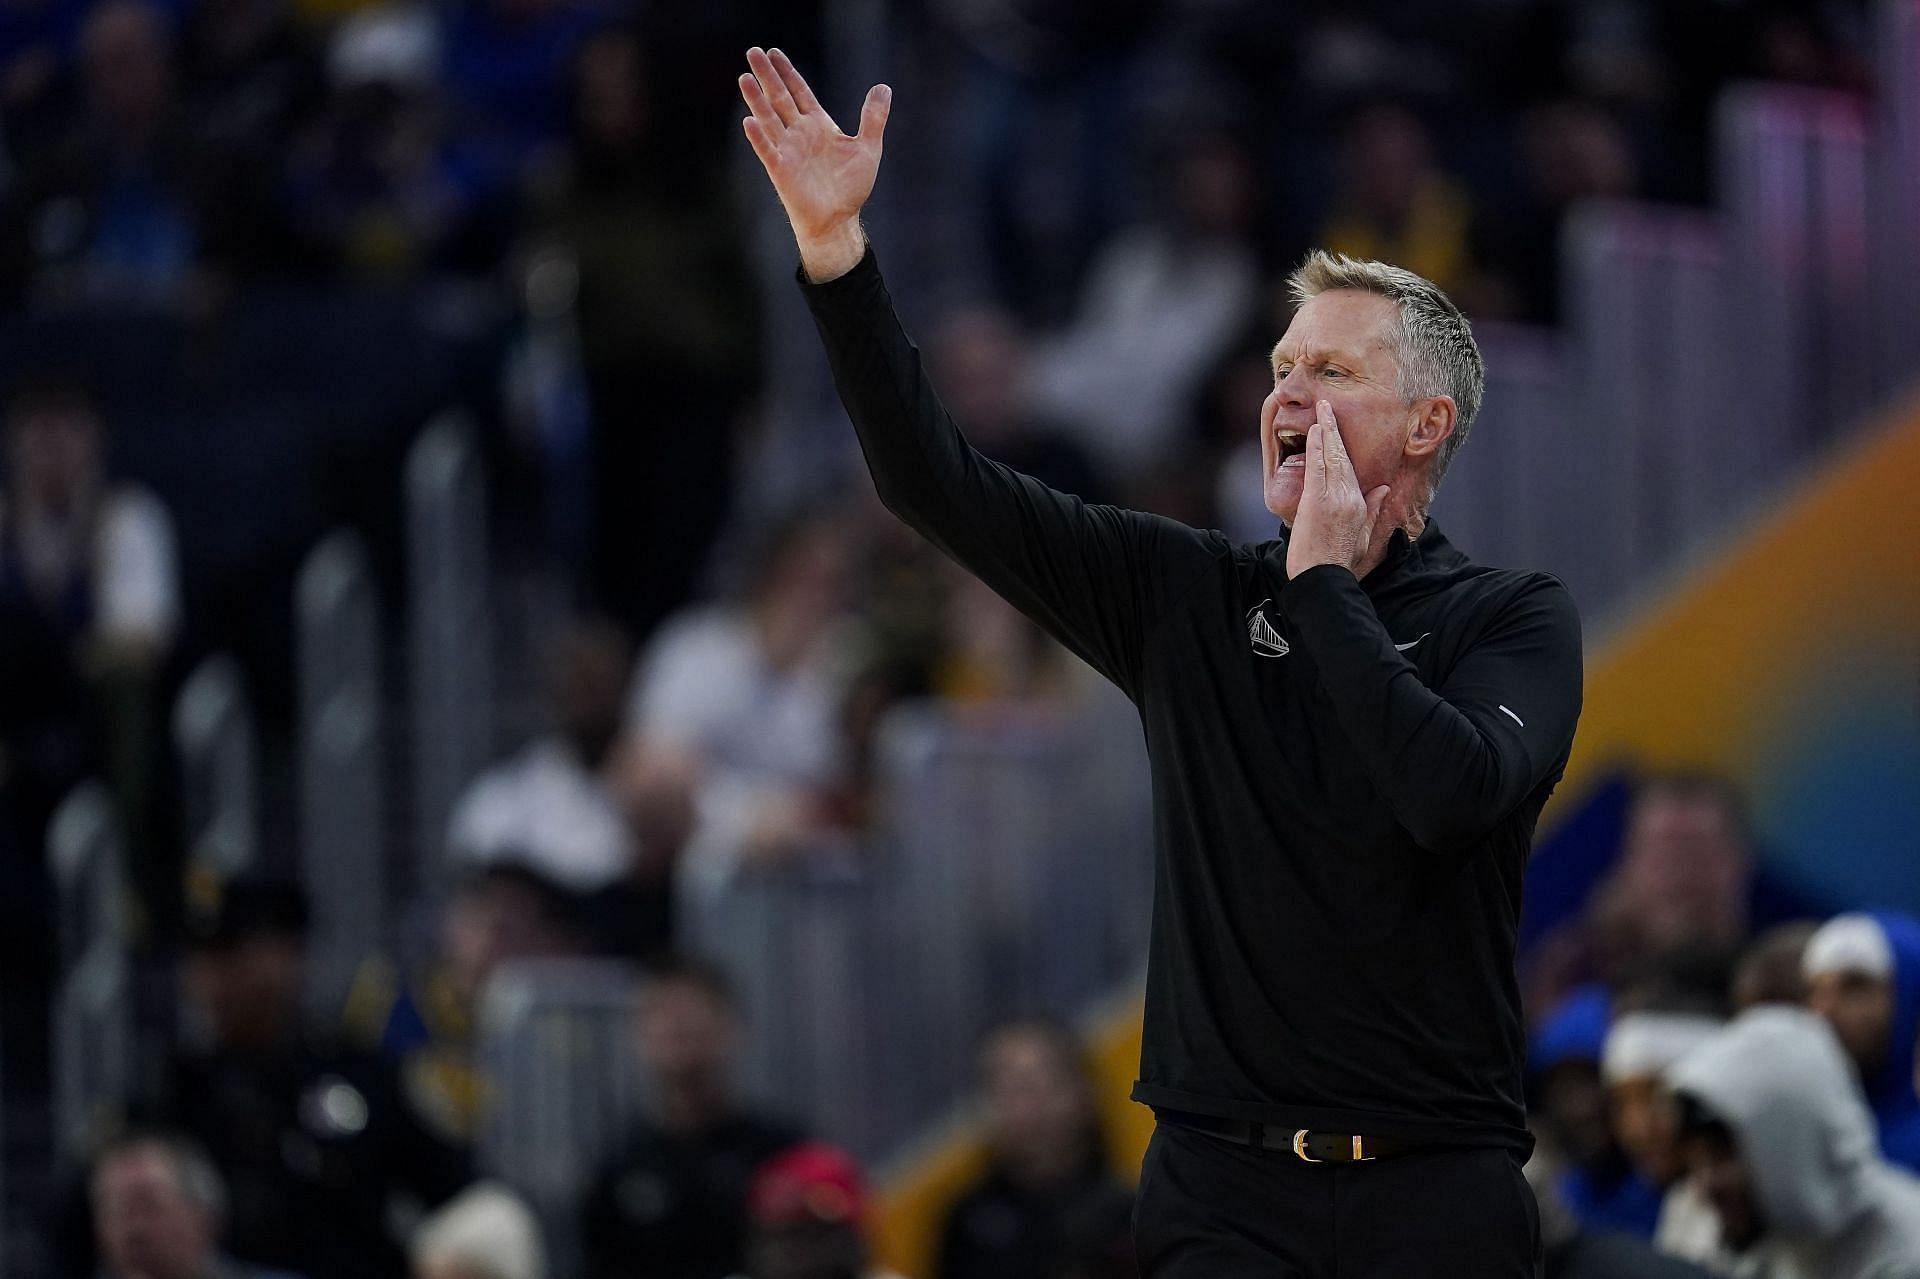 Steve Kerr calls for more consistency from Warriors star